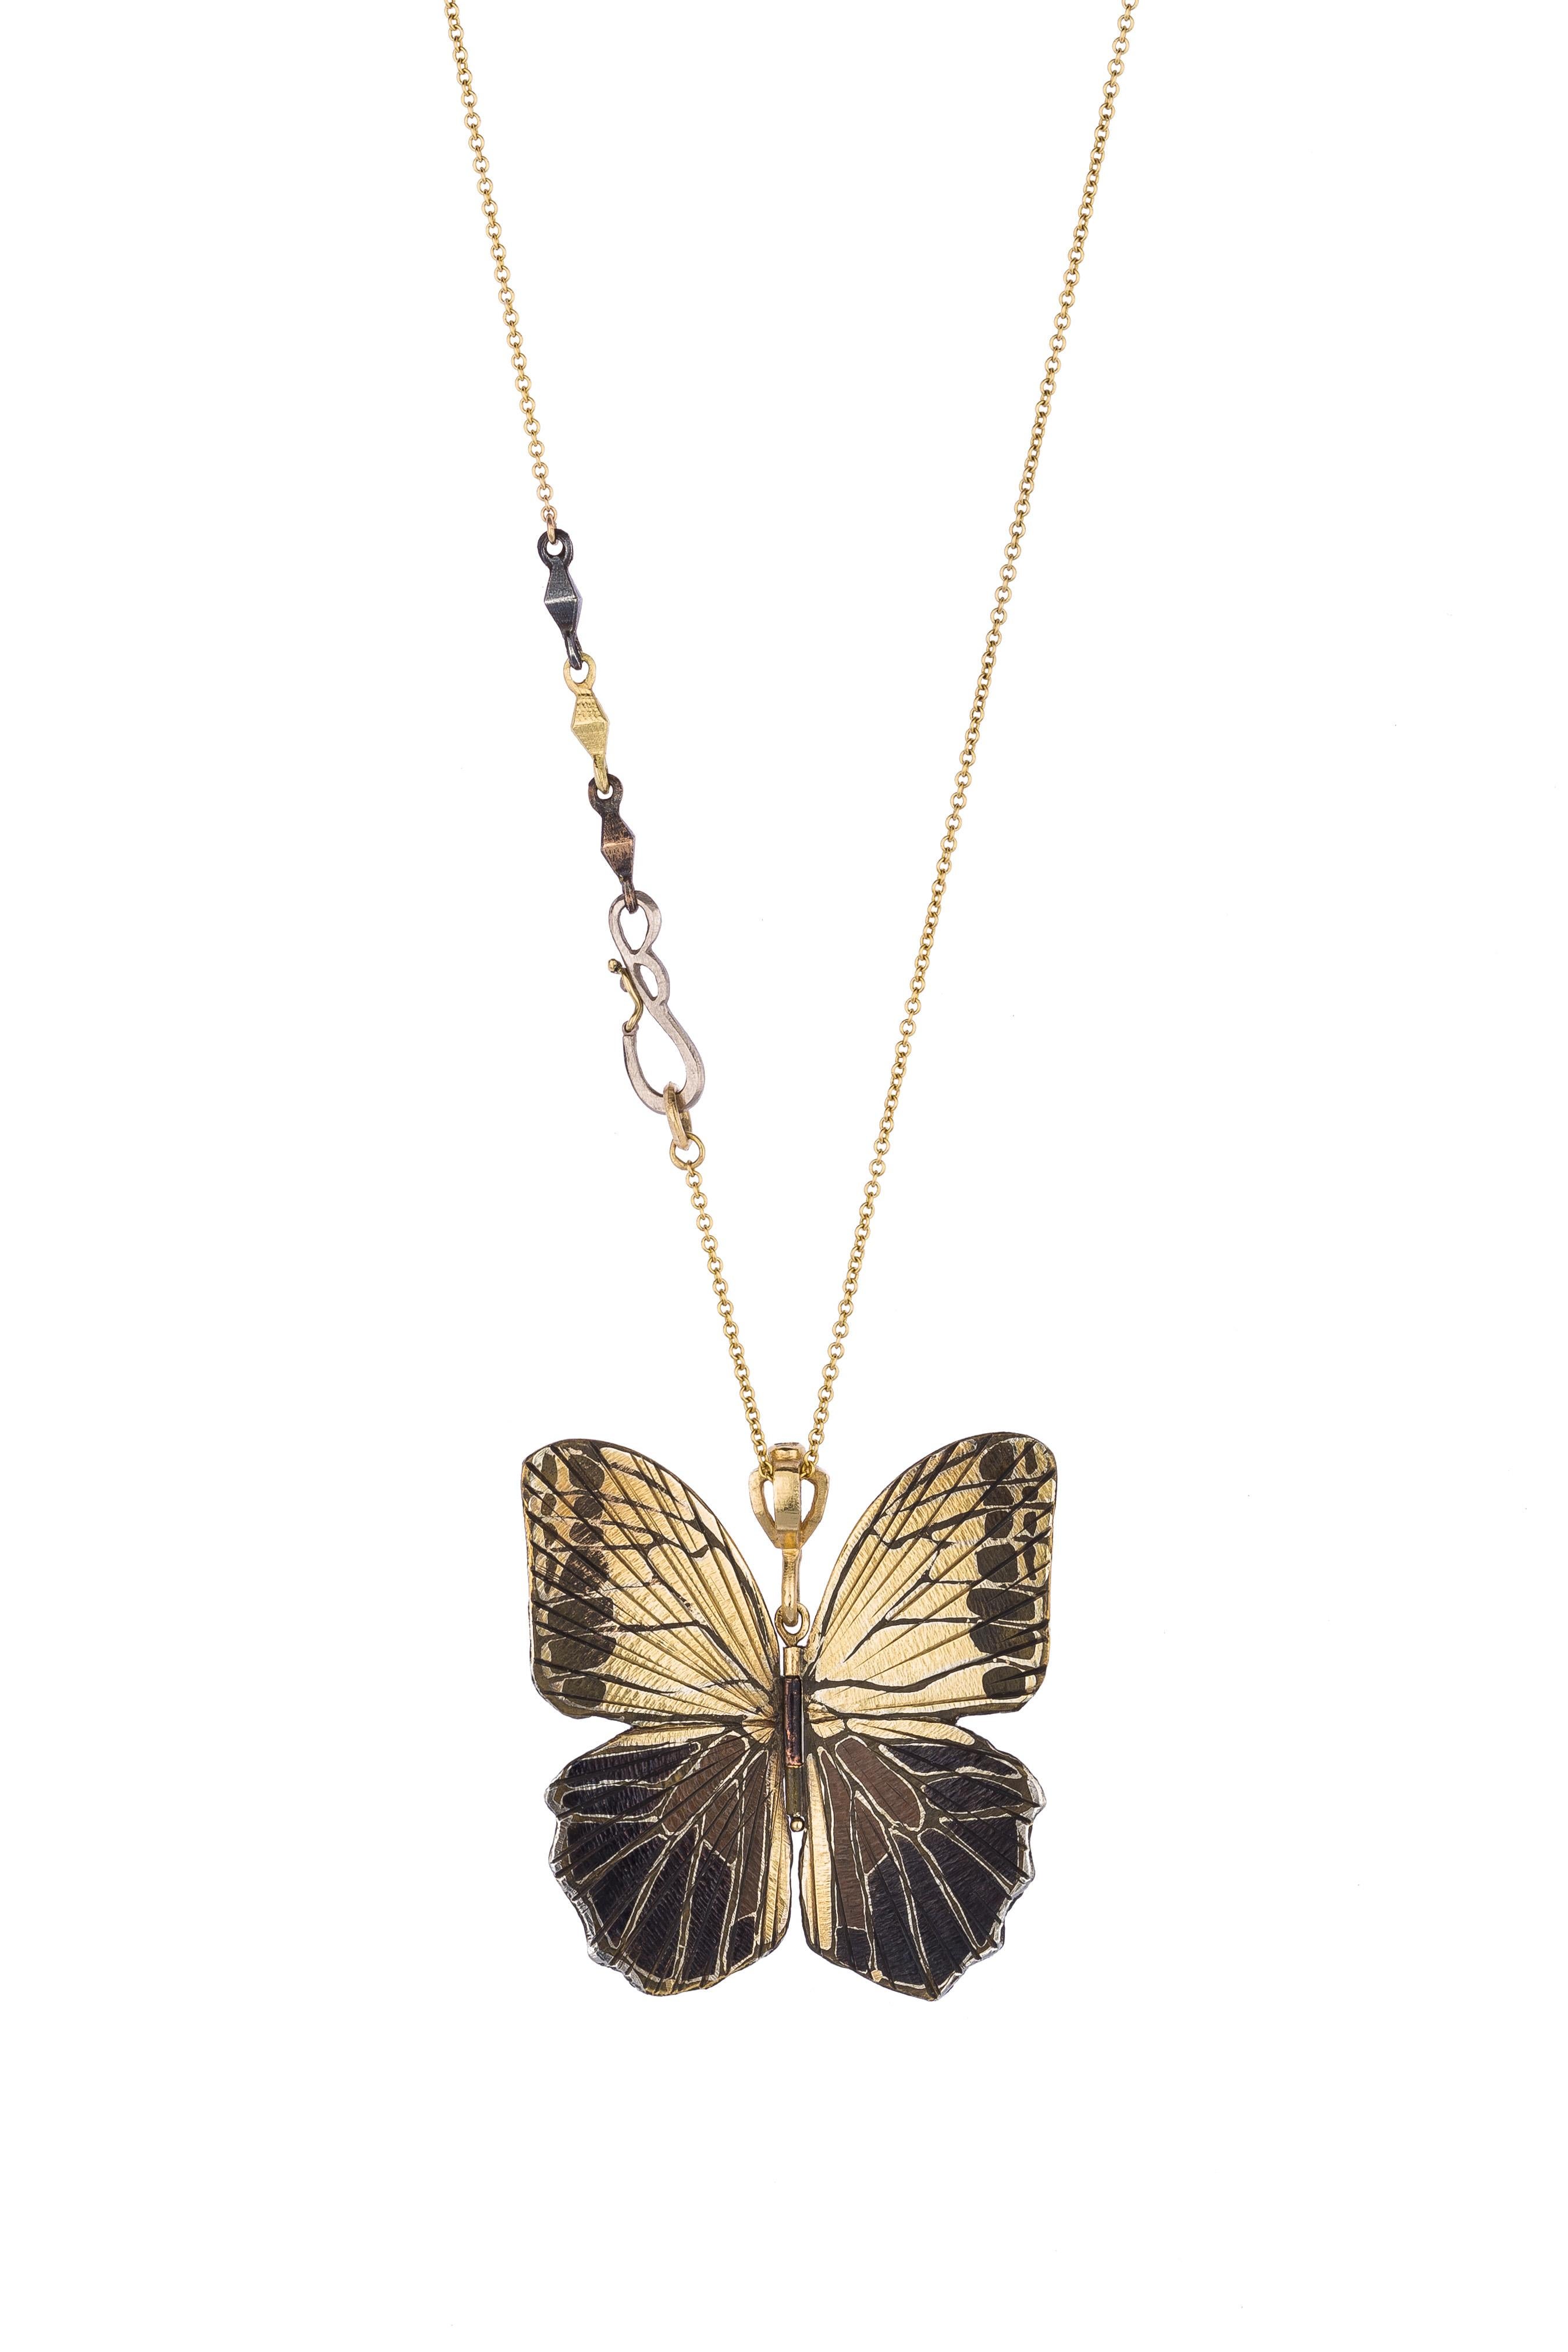 James Banks's signature butterfly necklace features a Large Owl Butterfly with a hinge at the center to allow movement of the wings, set in 18k Yellow Gold with Shakudo and Platinum, 18k White Gold, 14k Rose Gold, Sterling Silver, and Copper Inlay,